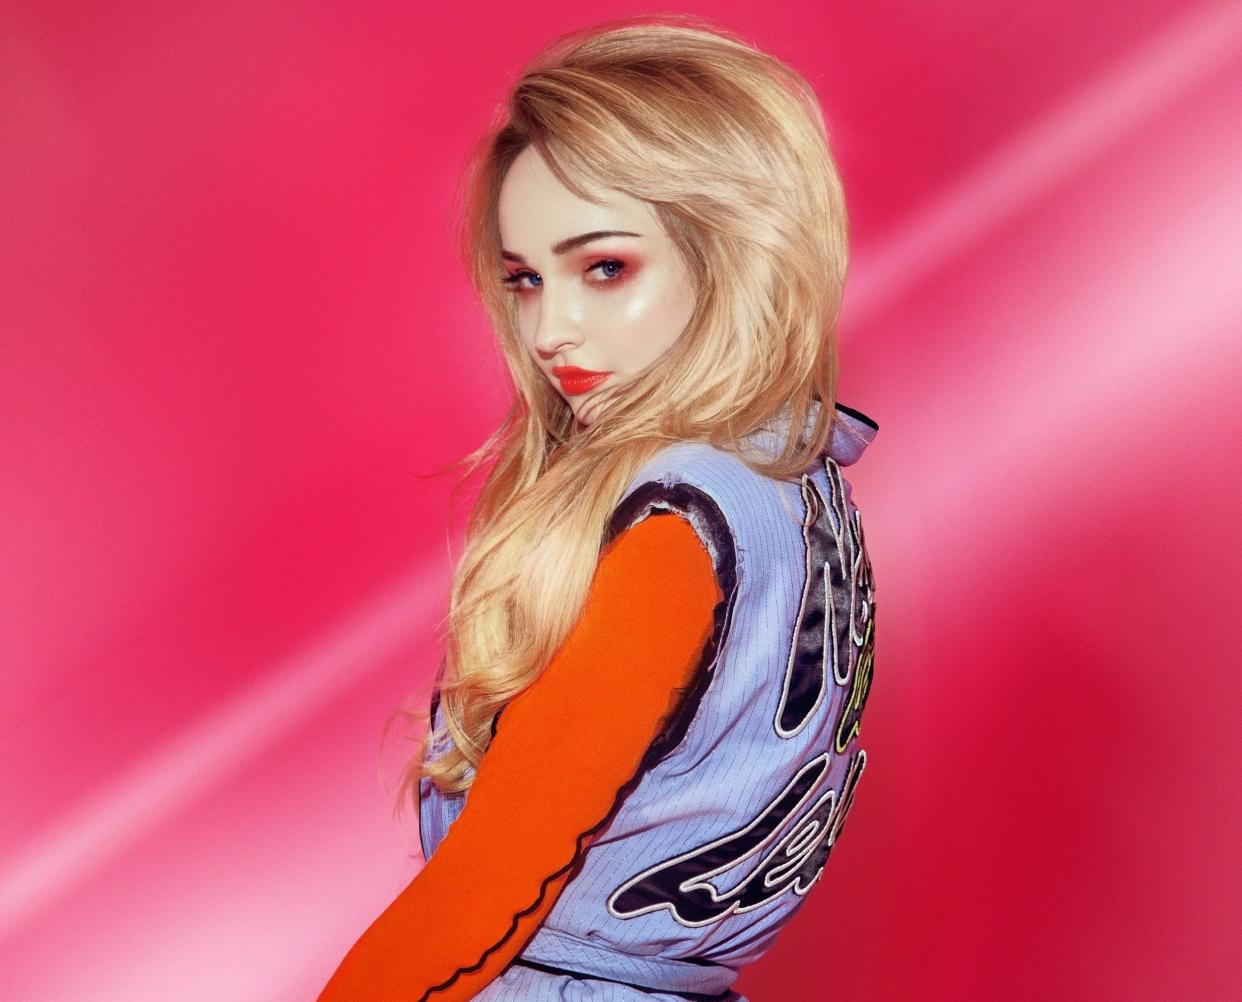 Kim Petras moved from Germany to Los Angeles to break into the music industry and spent her first year in the U.S. on a friend's couch. (Photo: Charlotte Rutherford)